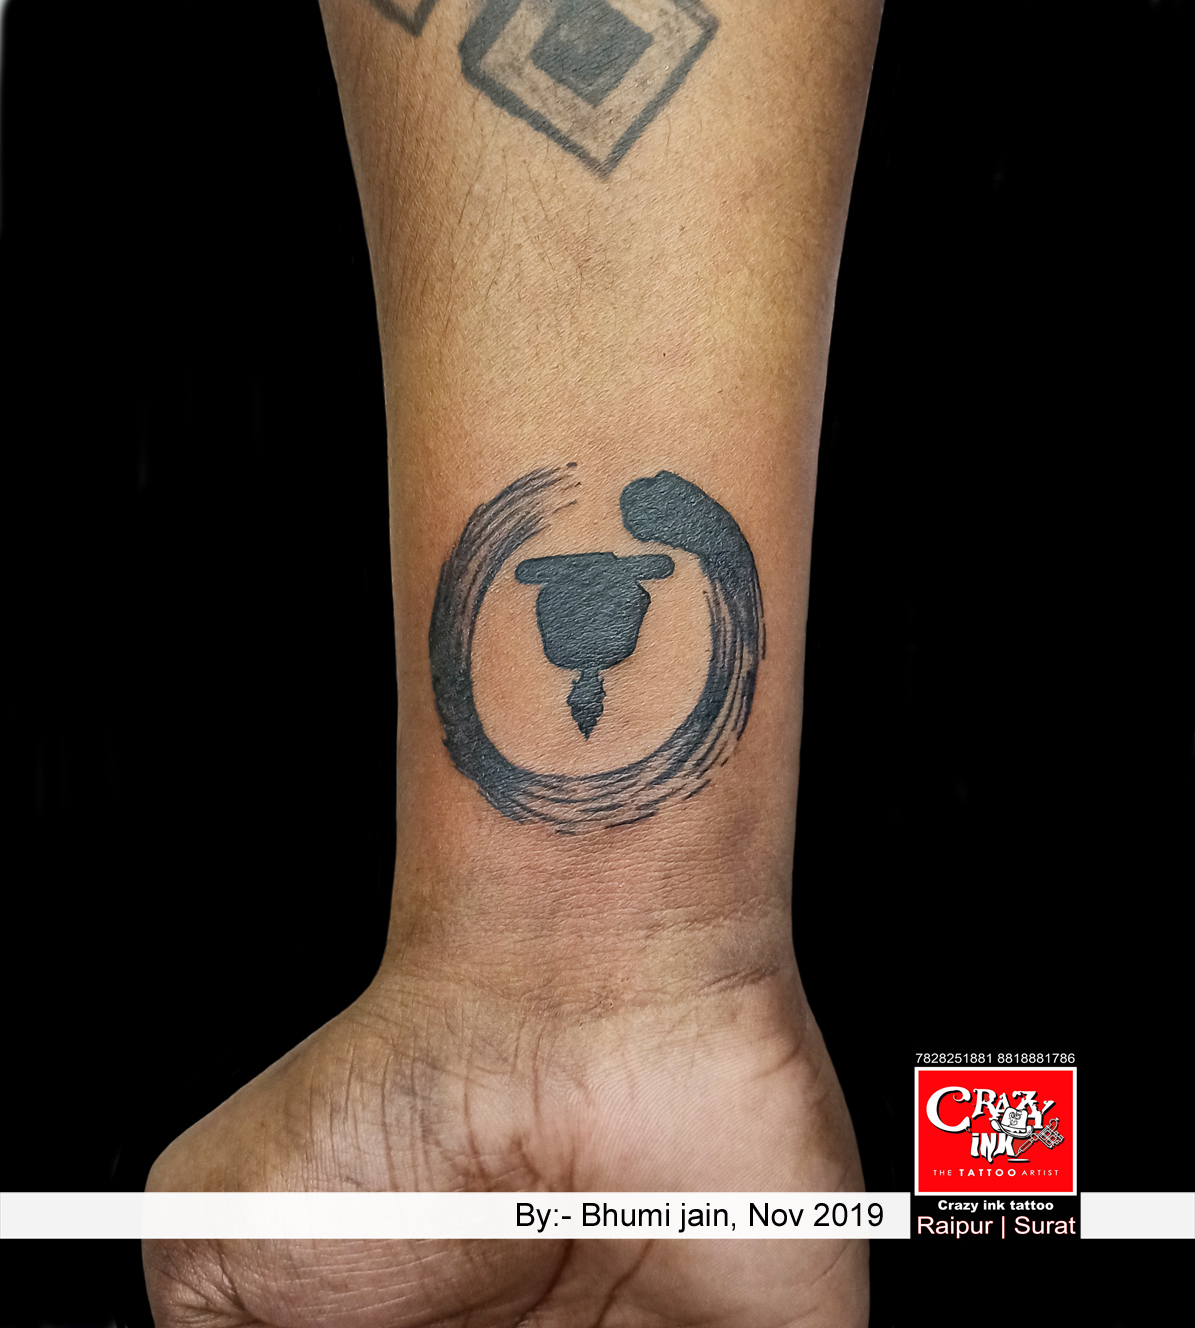 Needle Z - Tattoo & Piercing - Samurai inside the enso symbol definitely  has a deep meaning to our client's personal life and belief. This symbolic tattoo  design is brought to life